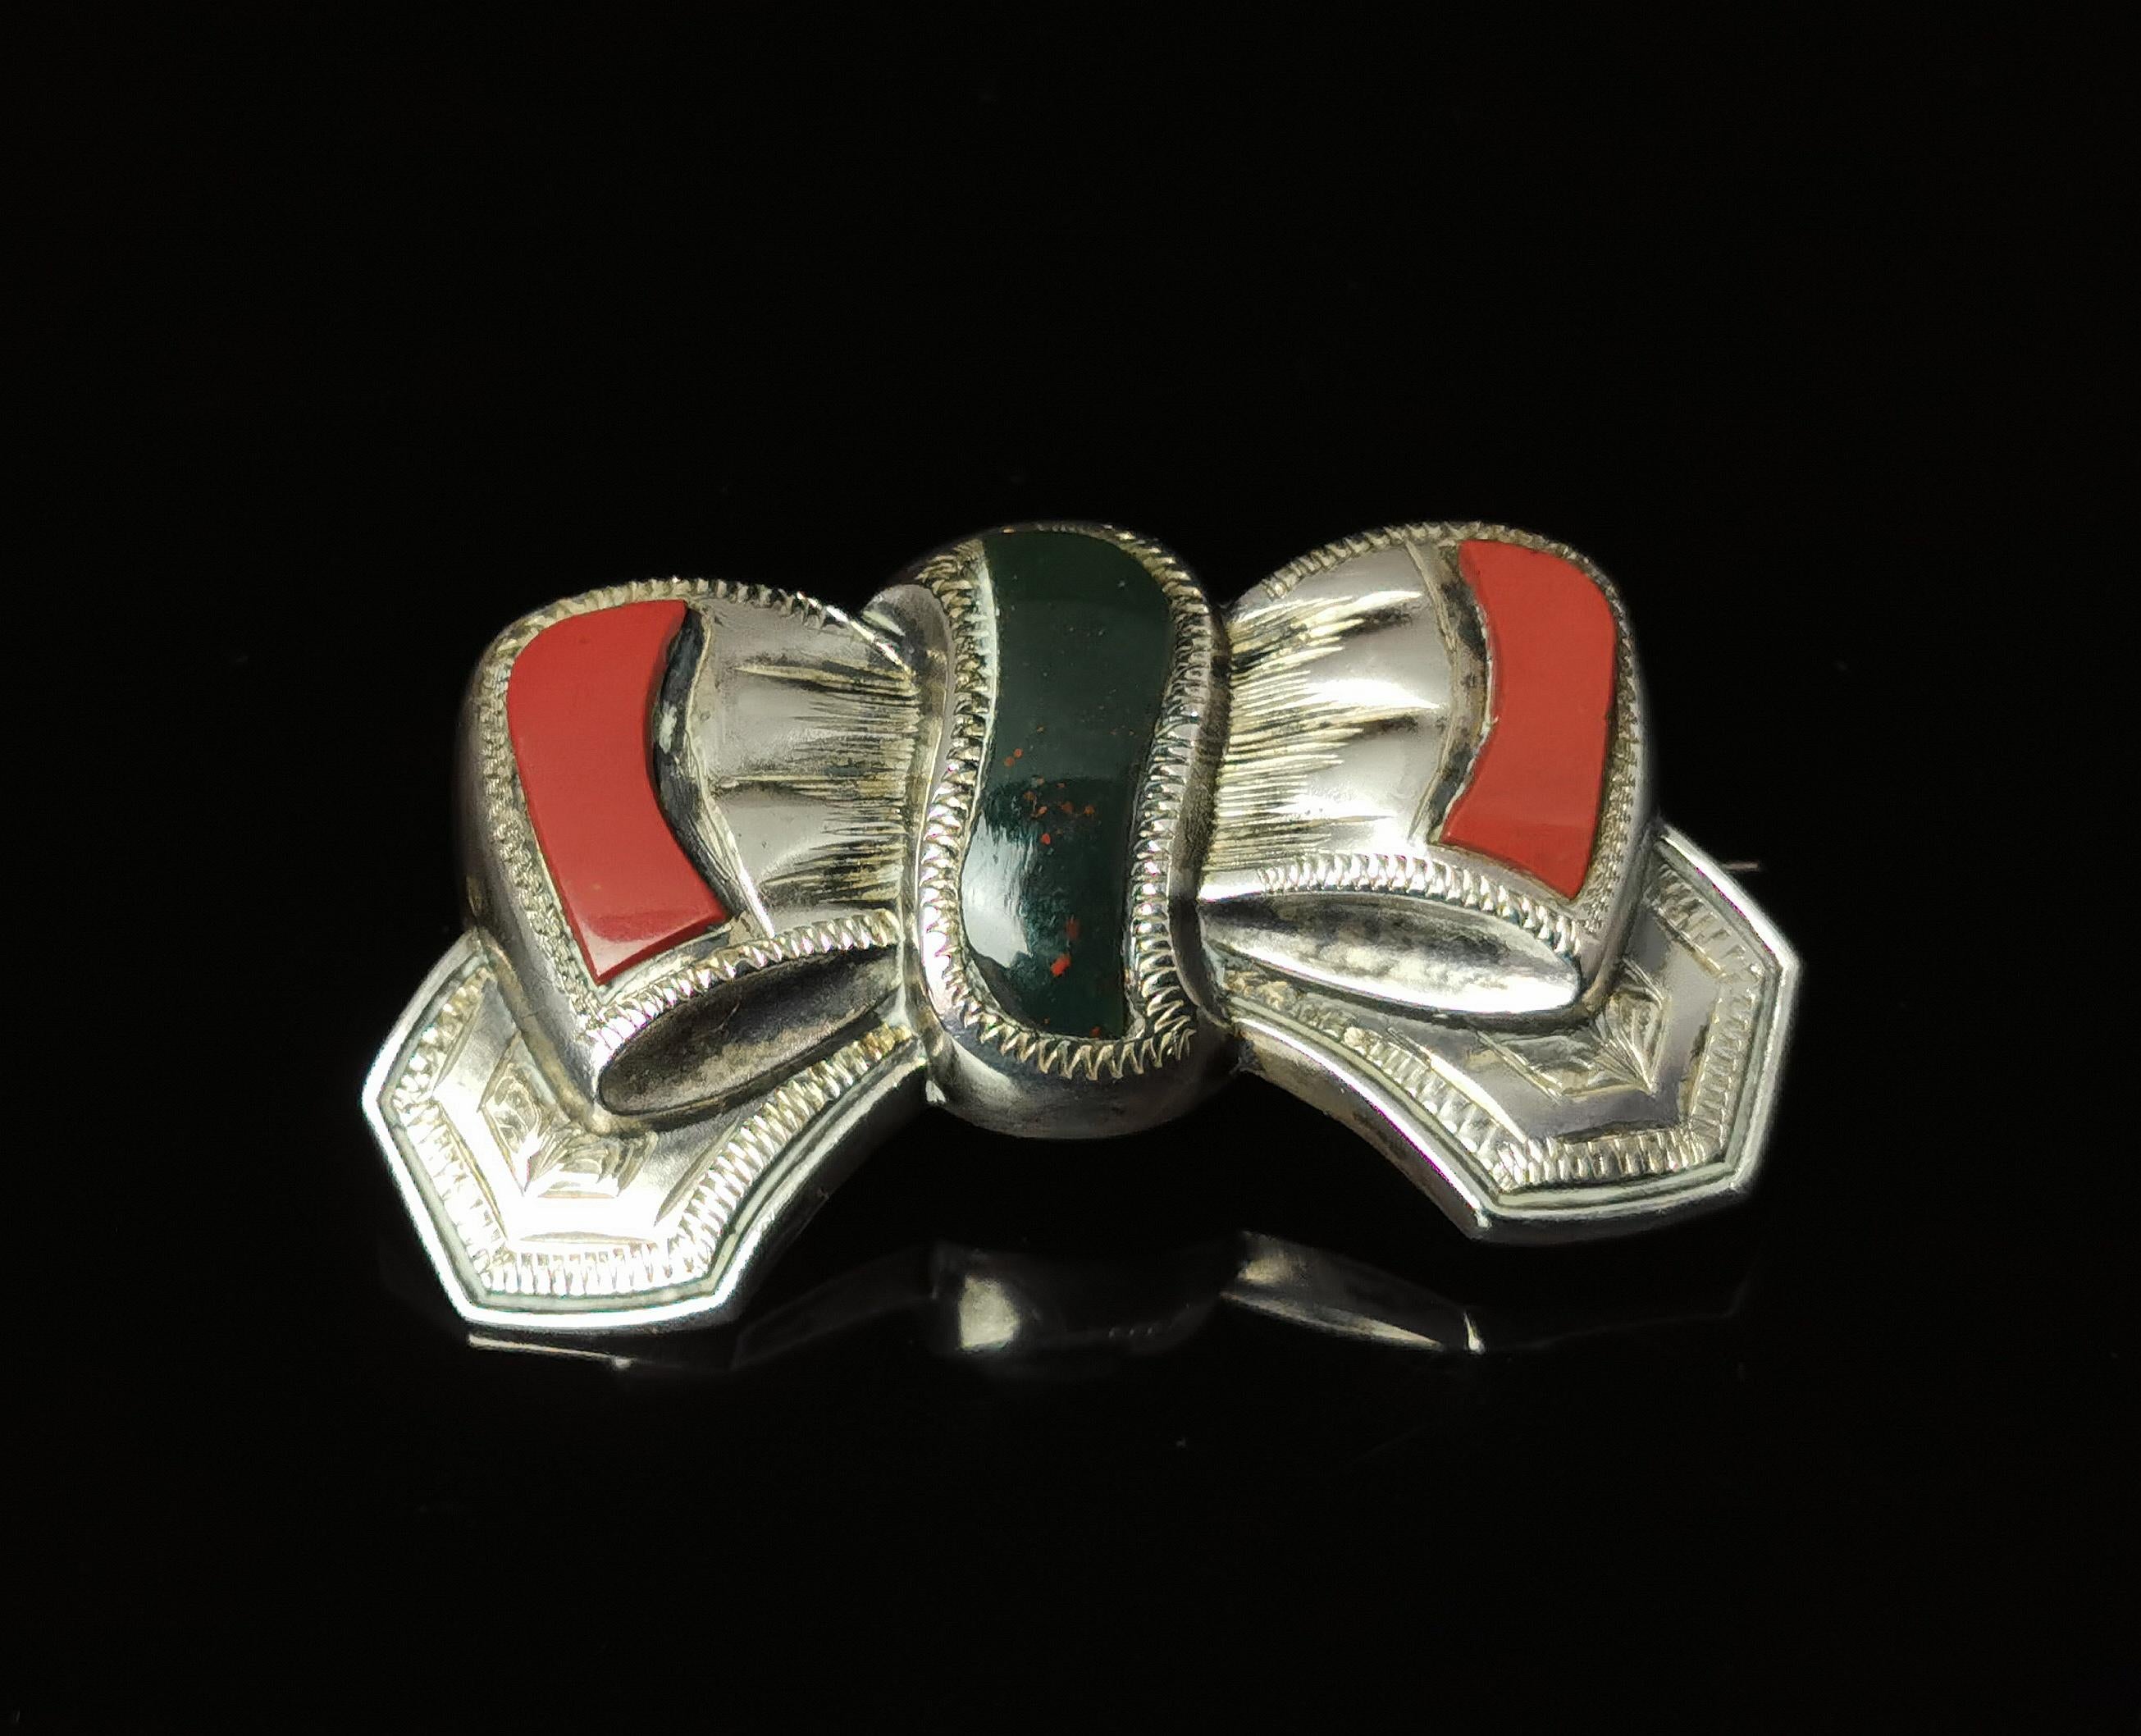 A gorgeous and antique Victorian, Scottish agate and Silver bow brooch.

It is a well designed piece modelled in sterling silver as a tied bow with great attention to detail and fine engraving.

The bow is set with Red Jasper and Bloodstone and it